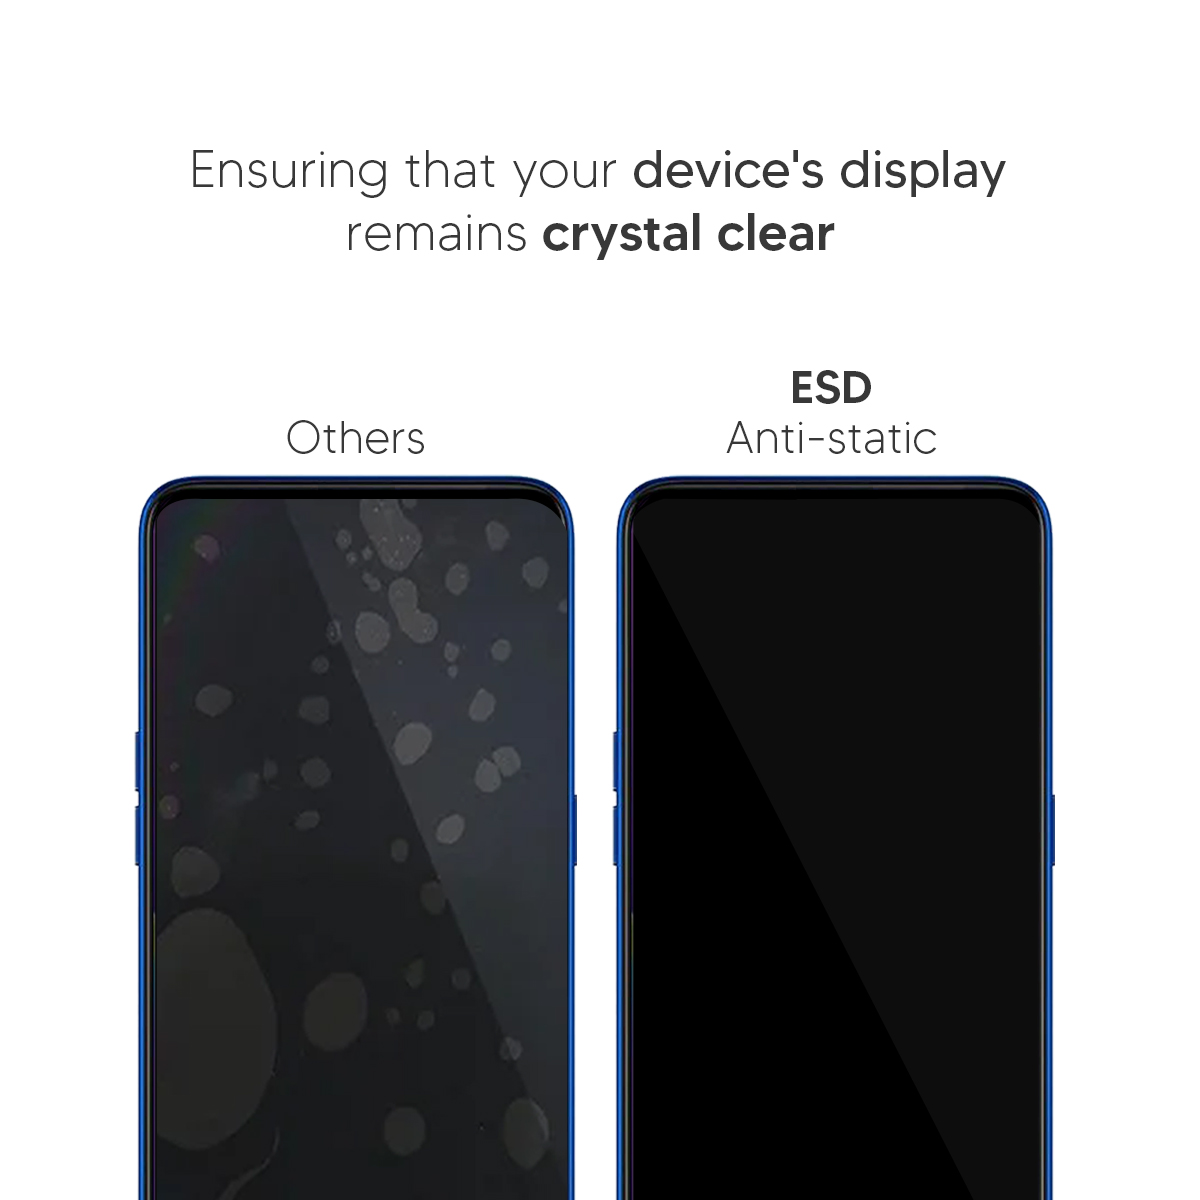 Beyox ESD Anti Static 5D Glass for Oppo A97